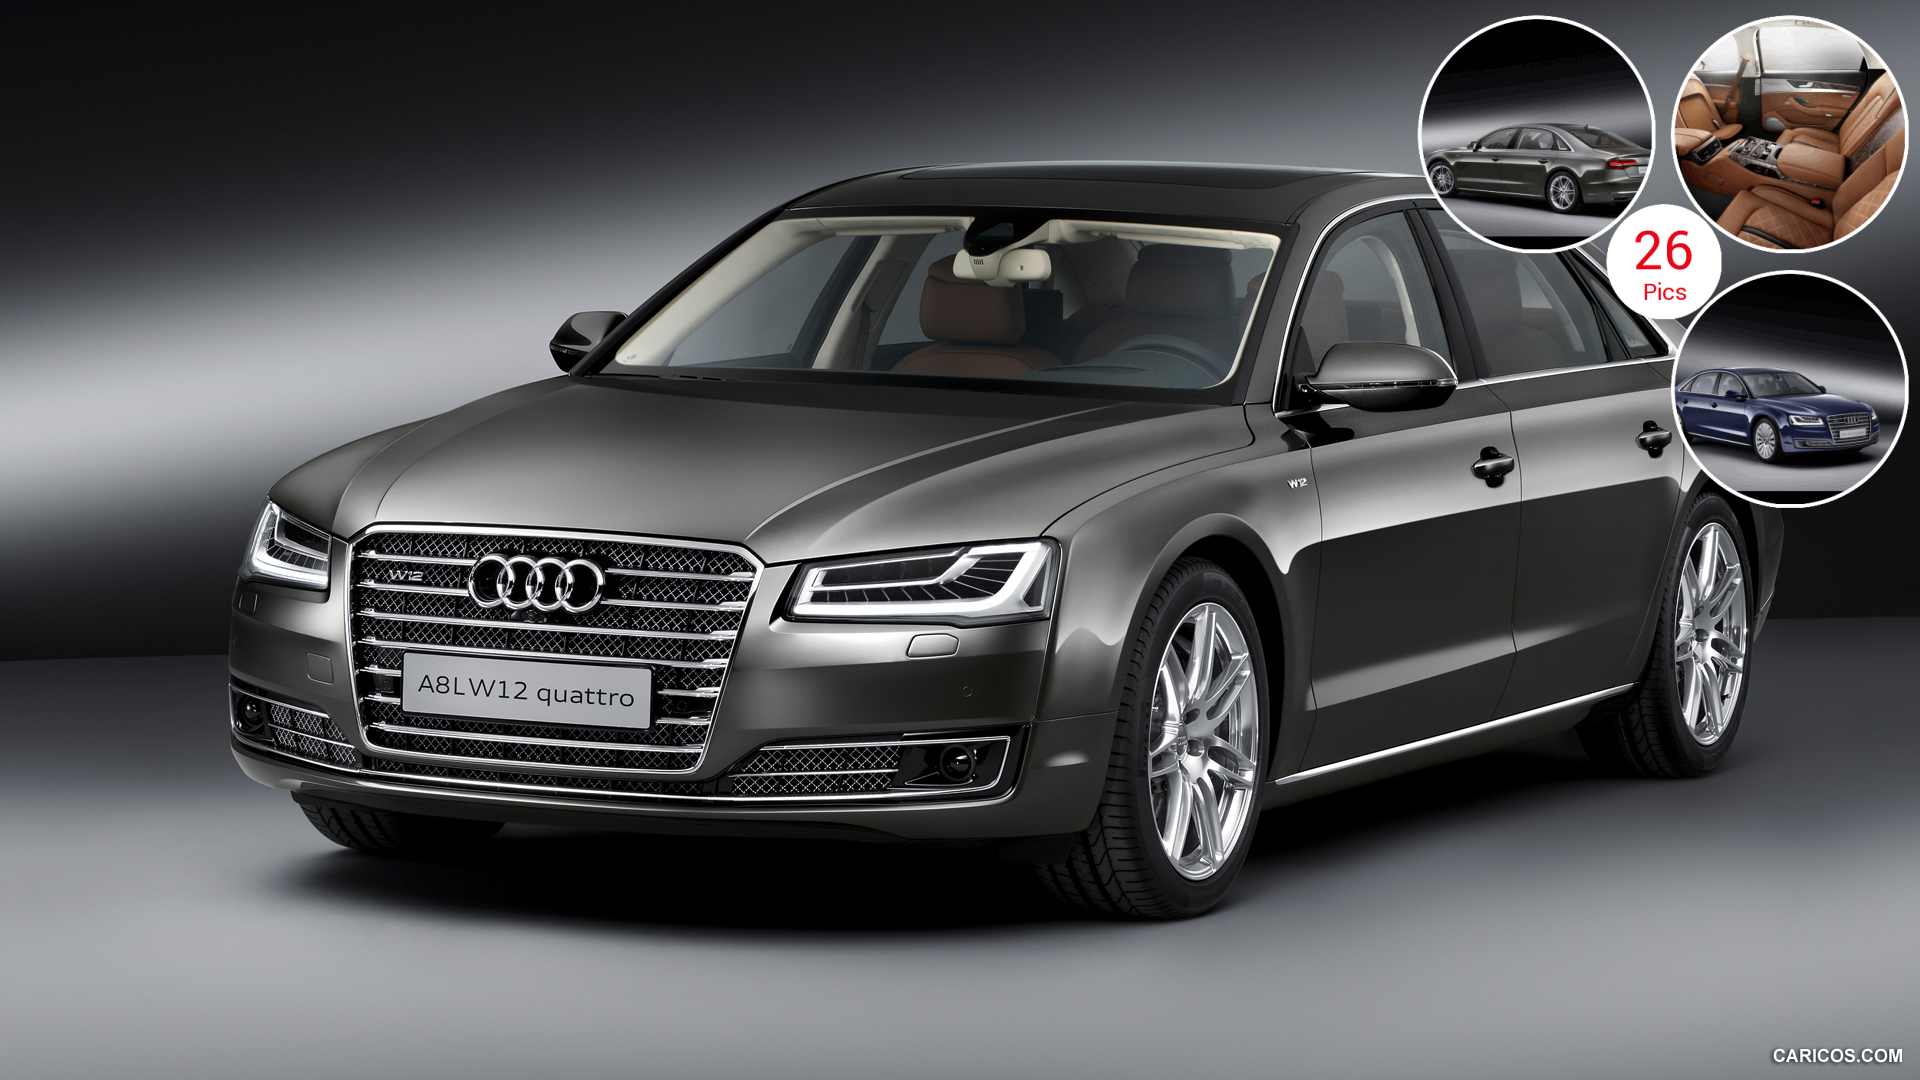 Audi A8 Cars Wallpaper Full HD 1080p Backgrounds Images HD